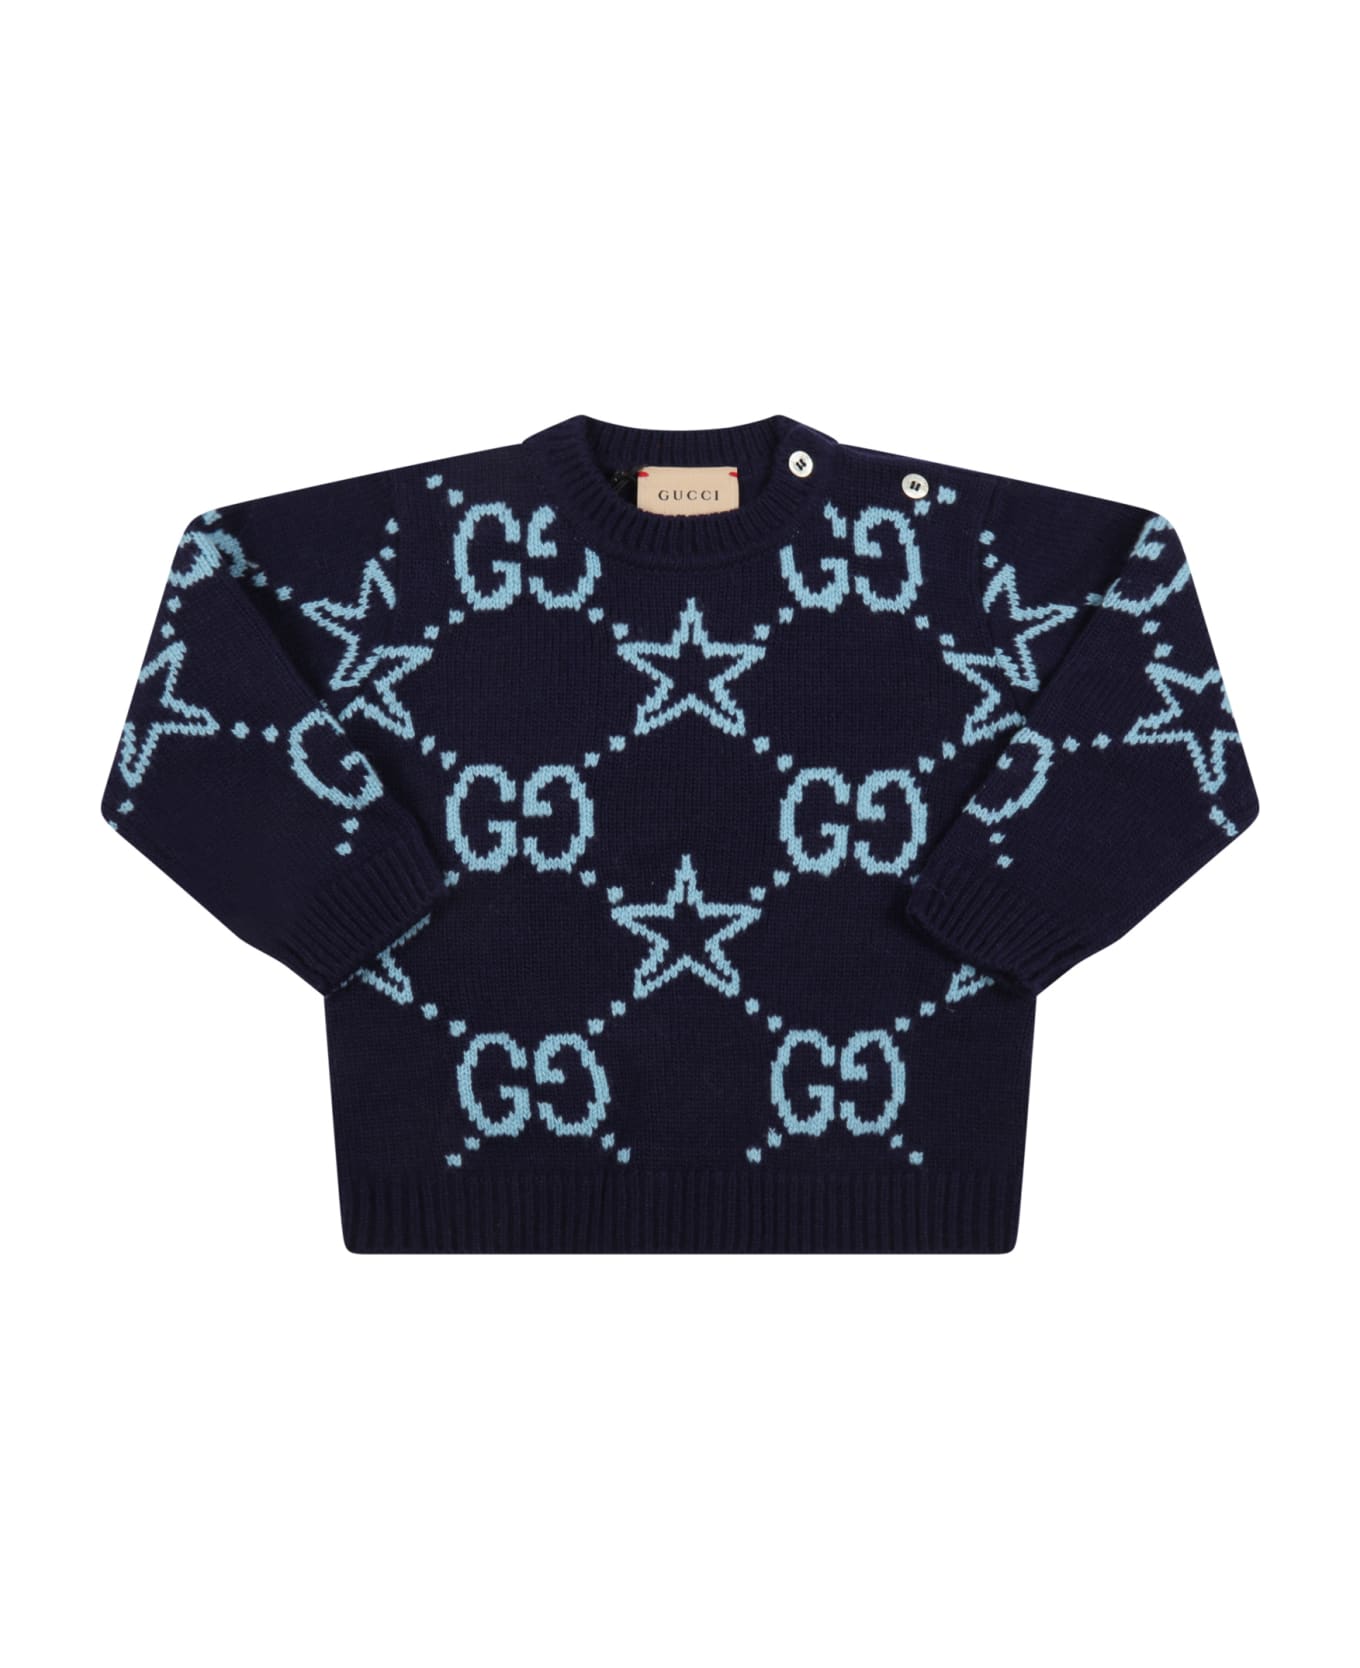 Gucci Blue Sweater For Baby Boy With Stars - Navy Baby Blue